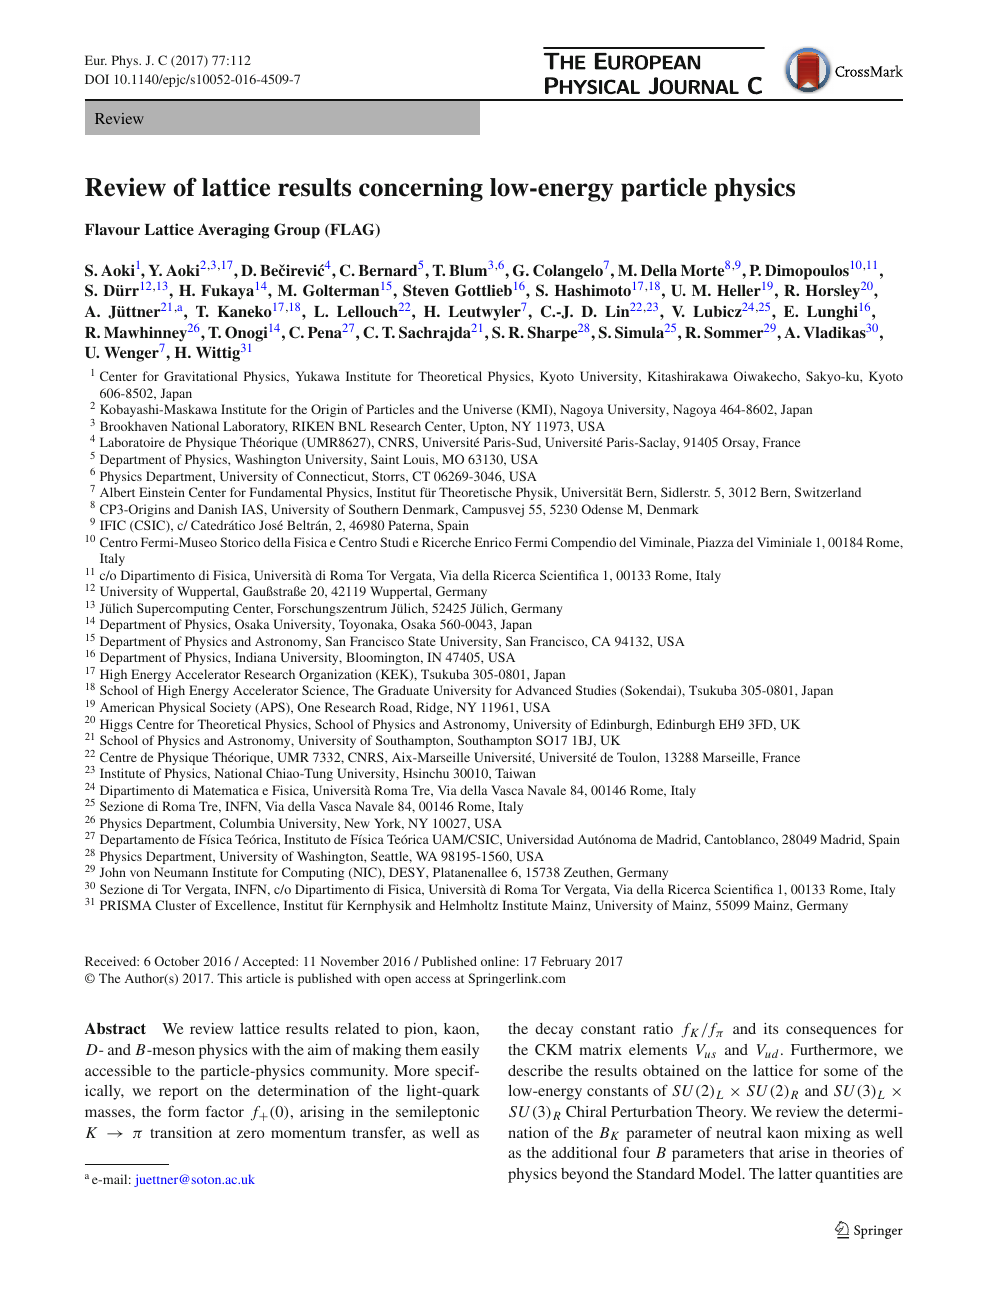 Review Of Lattice Results Concerning Low Energy Particle Physics Topic Of Research Paper In Physical Sciences Download Scholarly Article Pdf And Read For Free On Cyberleninka Open Science Hub